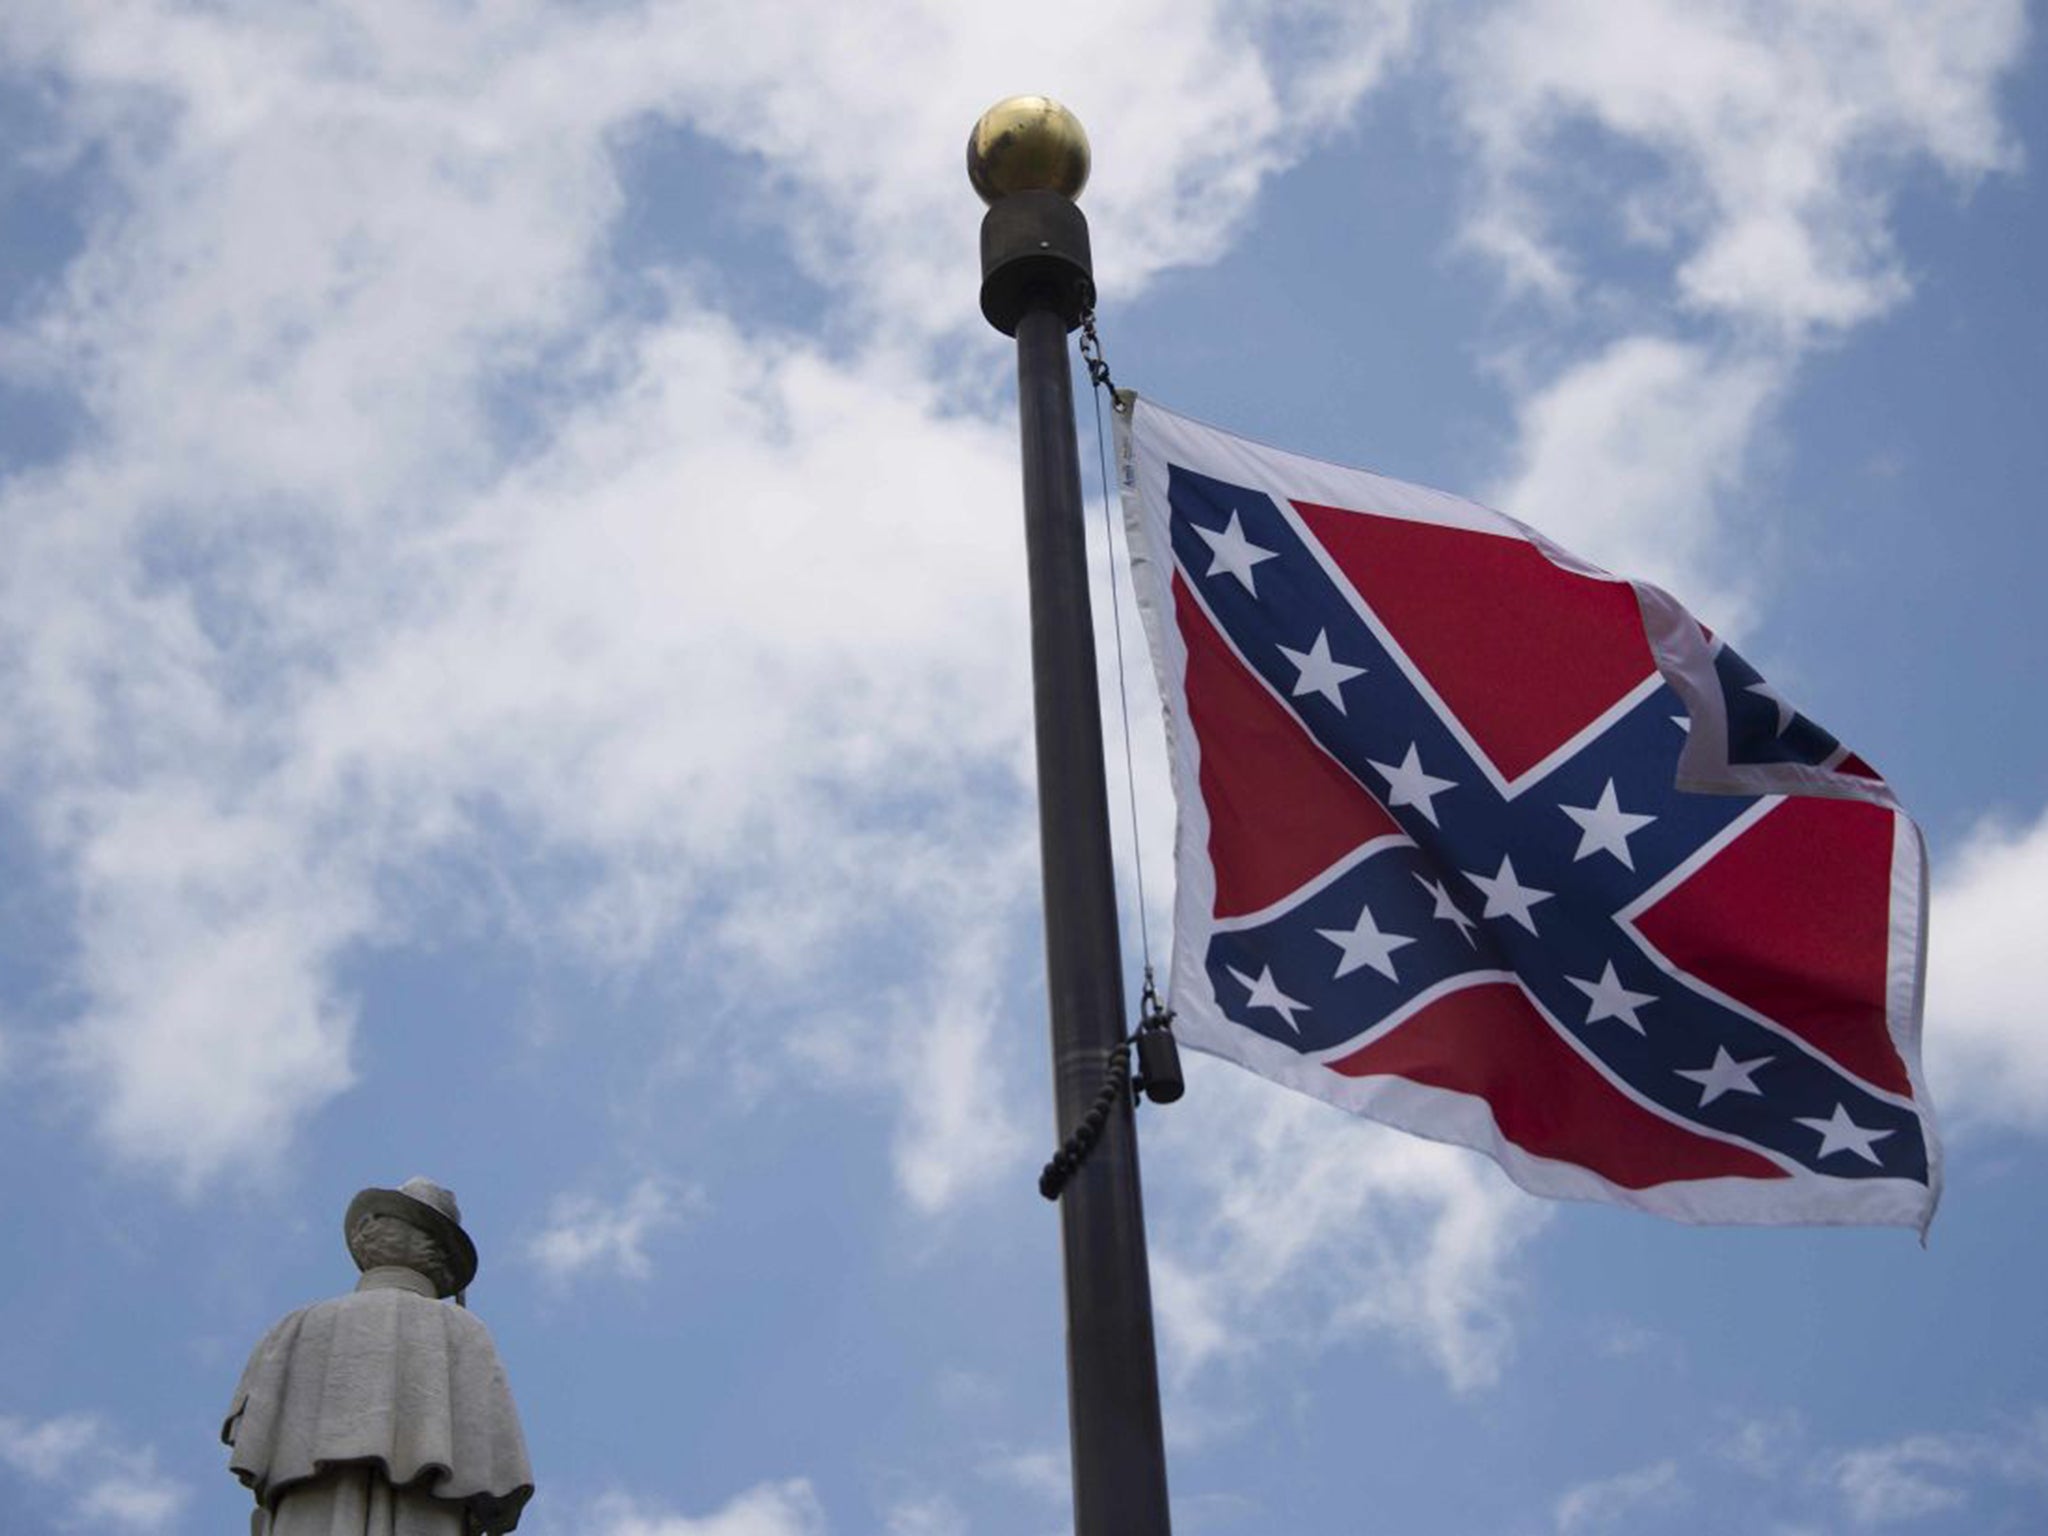 Courtney Daniels — a black Birmingham, Ala., native and Marine — argues that the Confederate flag and its “gorgeous colors” were hijacked by “a few cowards in bedsheets,” obscuring its rich history.